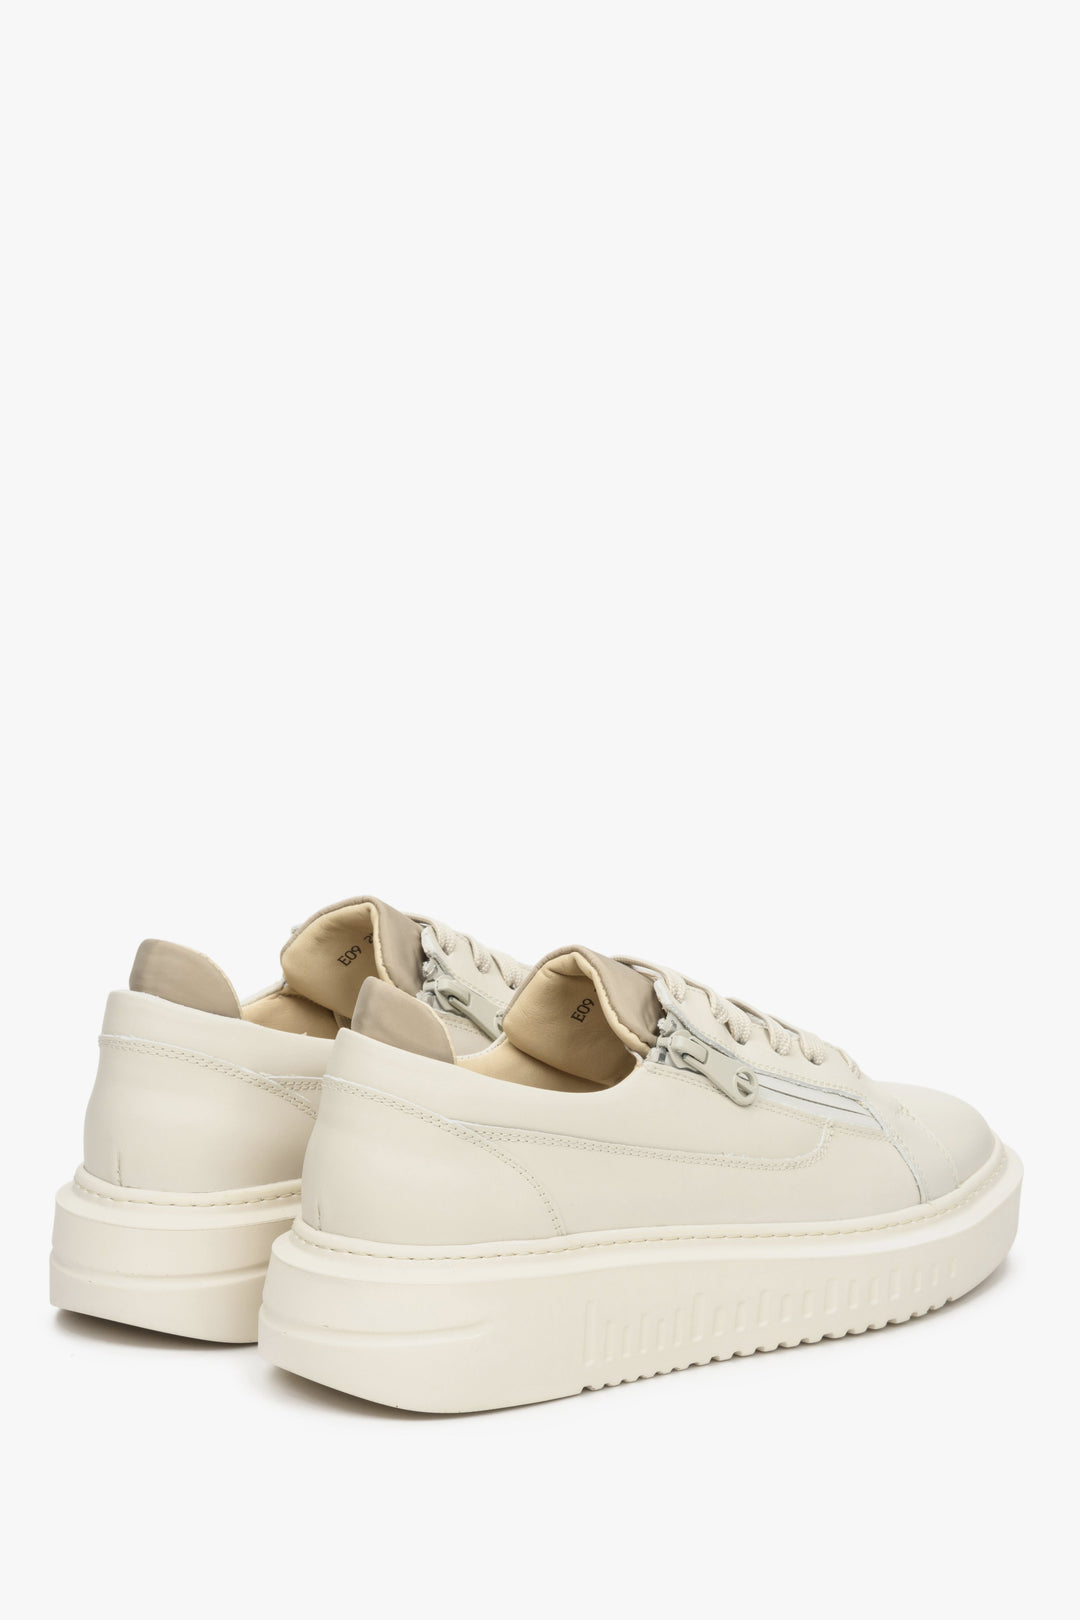 Beige women's sneakers made of genuine leather by Estro - presentation of the heel and the side seam.